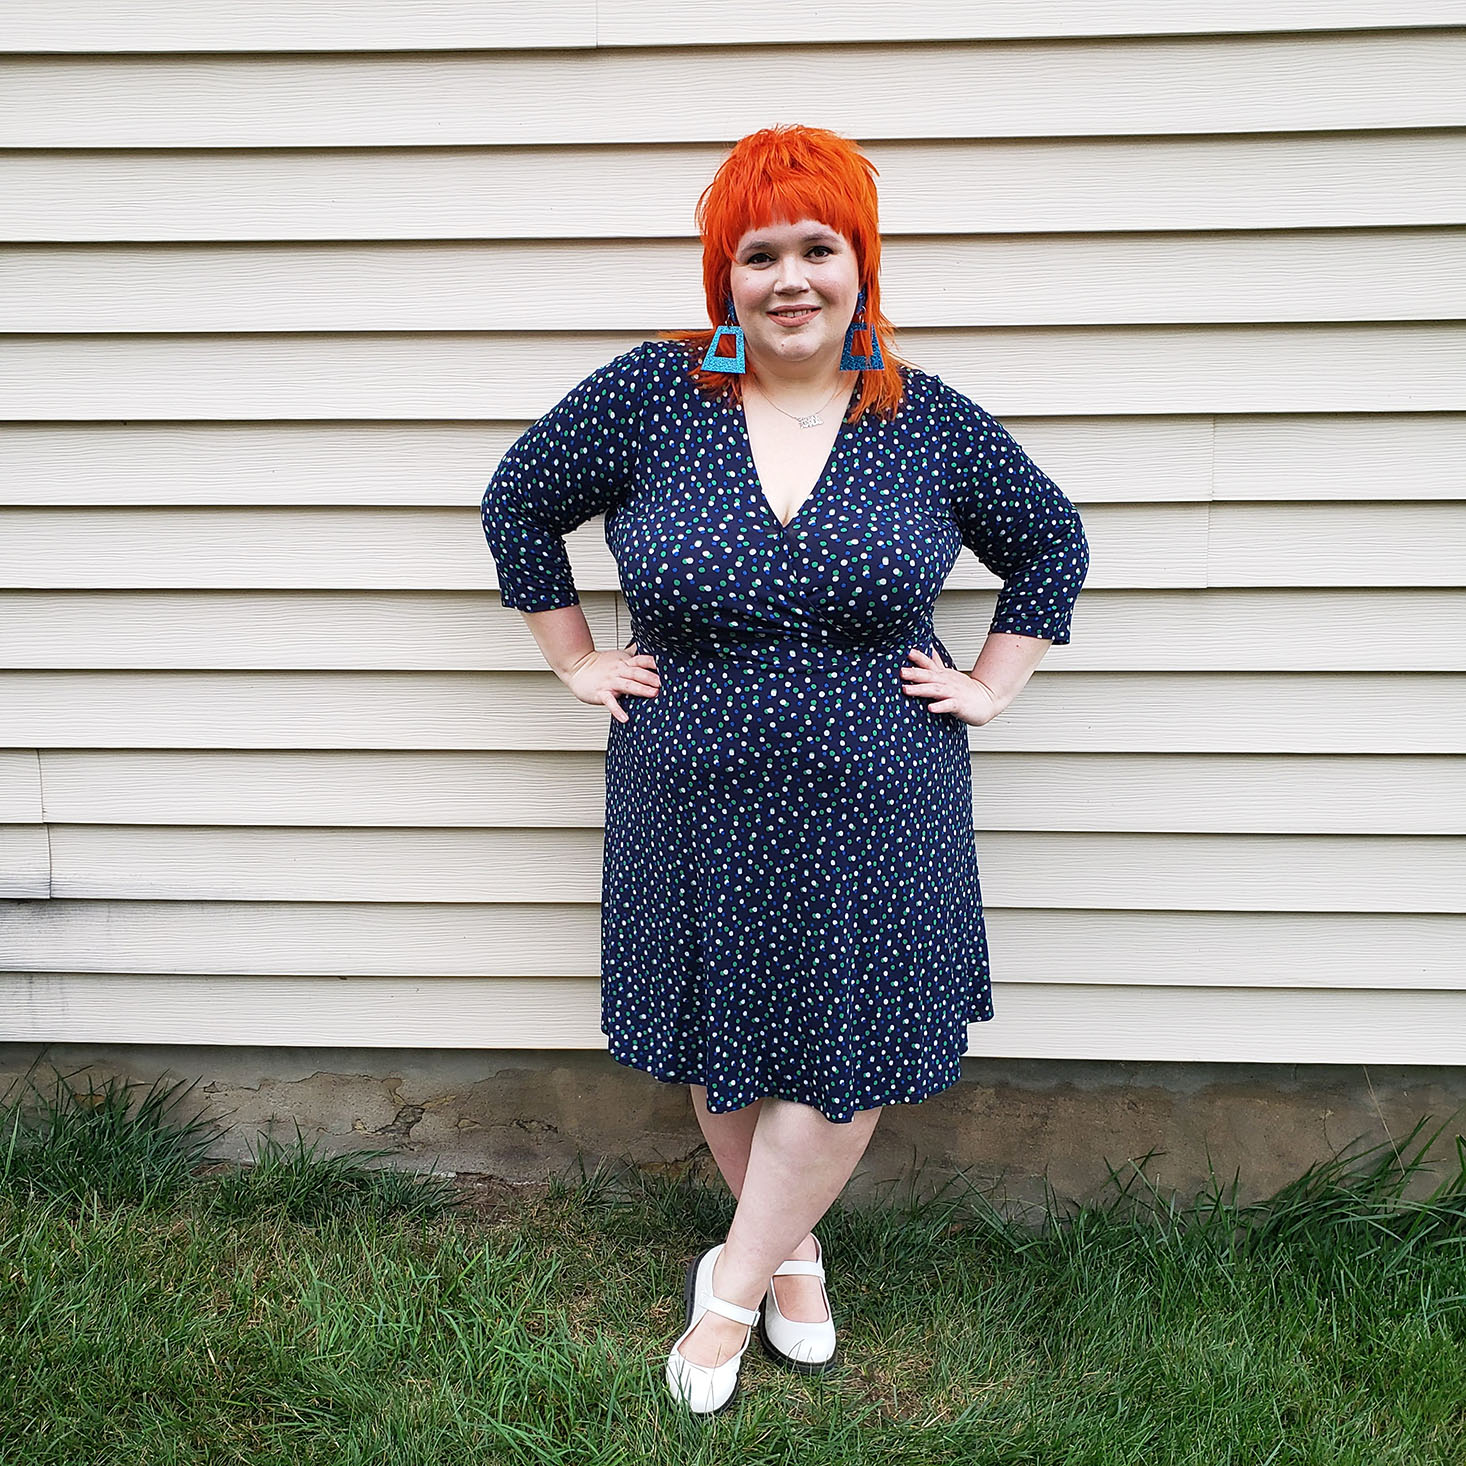 Gwynnie Bee Plus Size Clothing September 2021 Review + Coupon